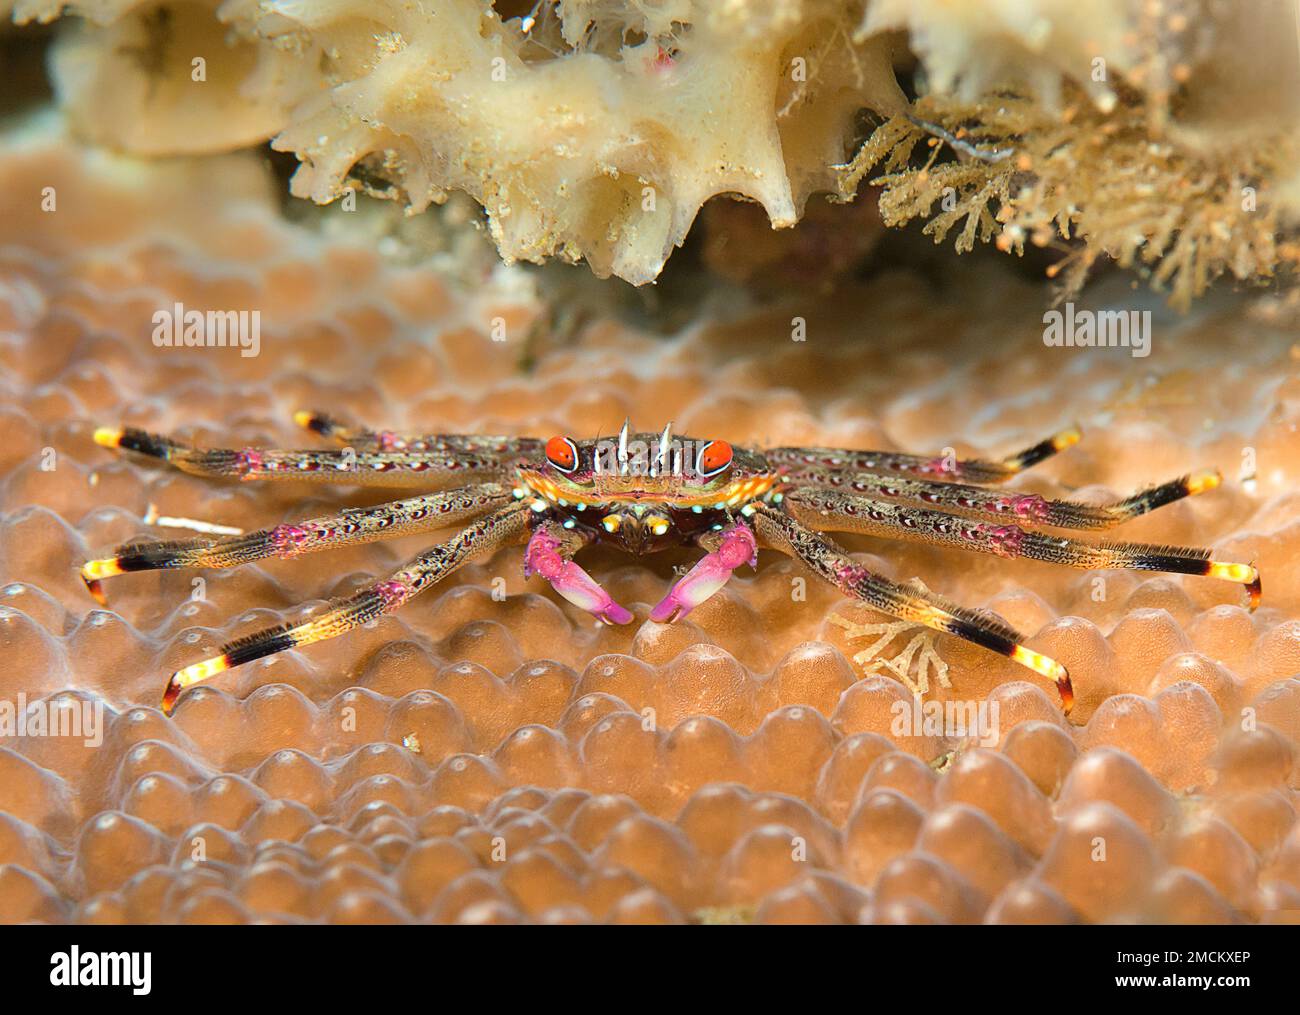 Flat rock crab , Percnon planissimum rests on coral of Bali Stock Photo